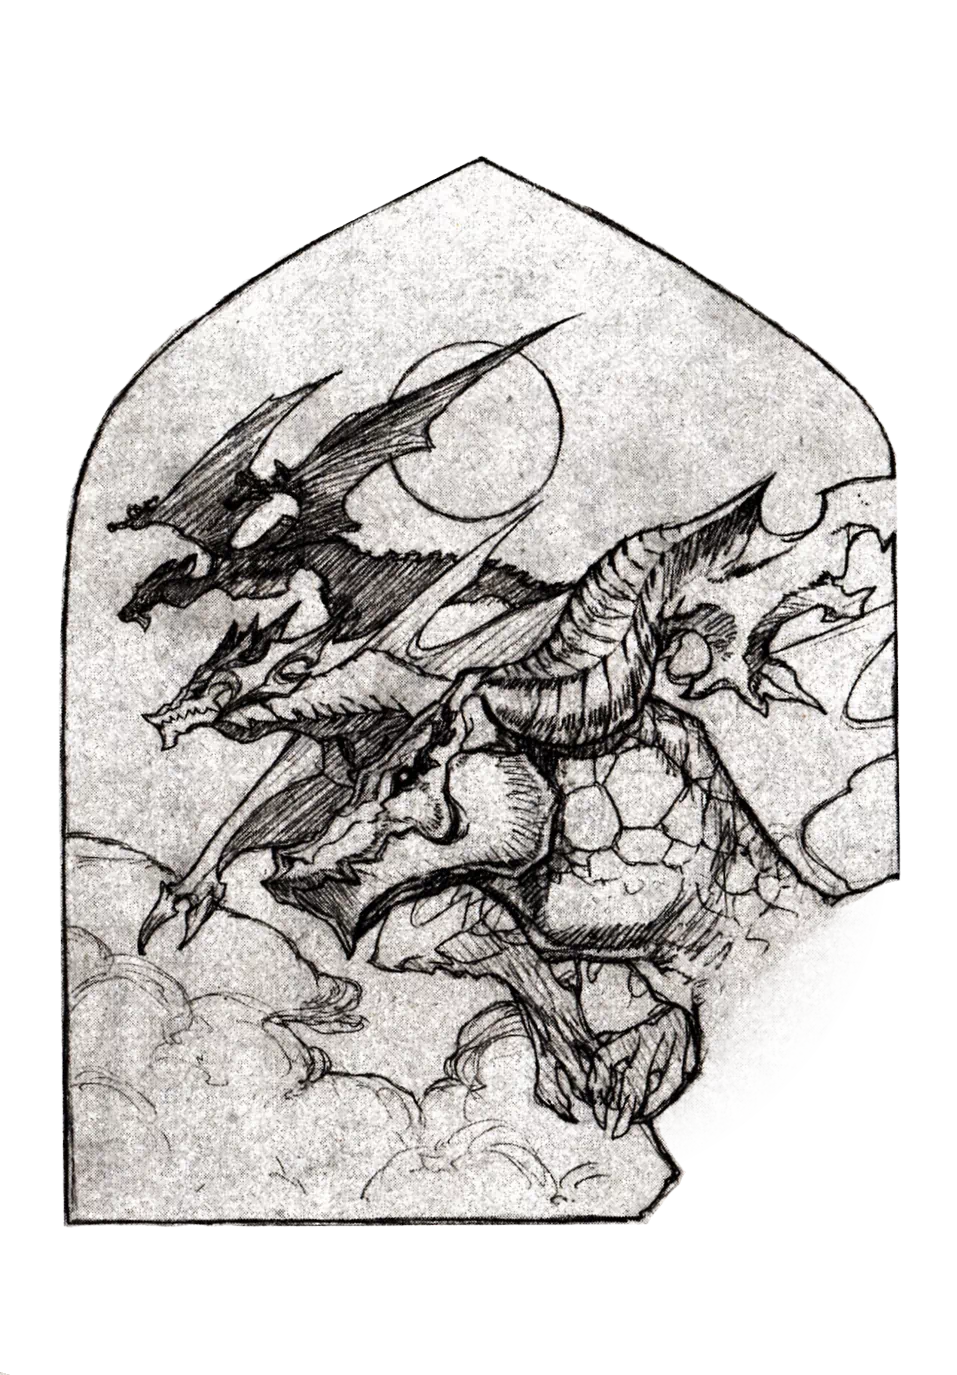 Pencil drawing of several dragons in the DoD style, one of them Michael.